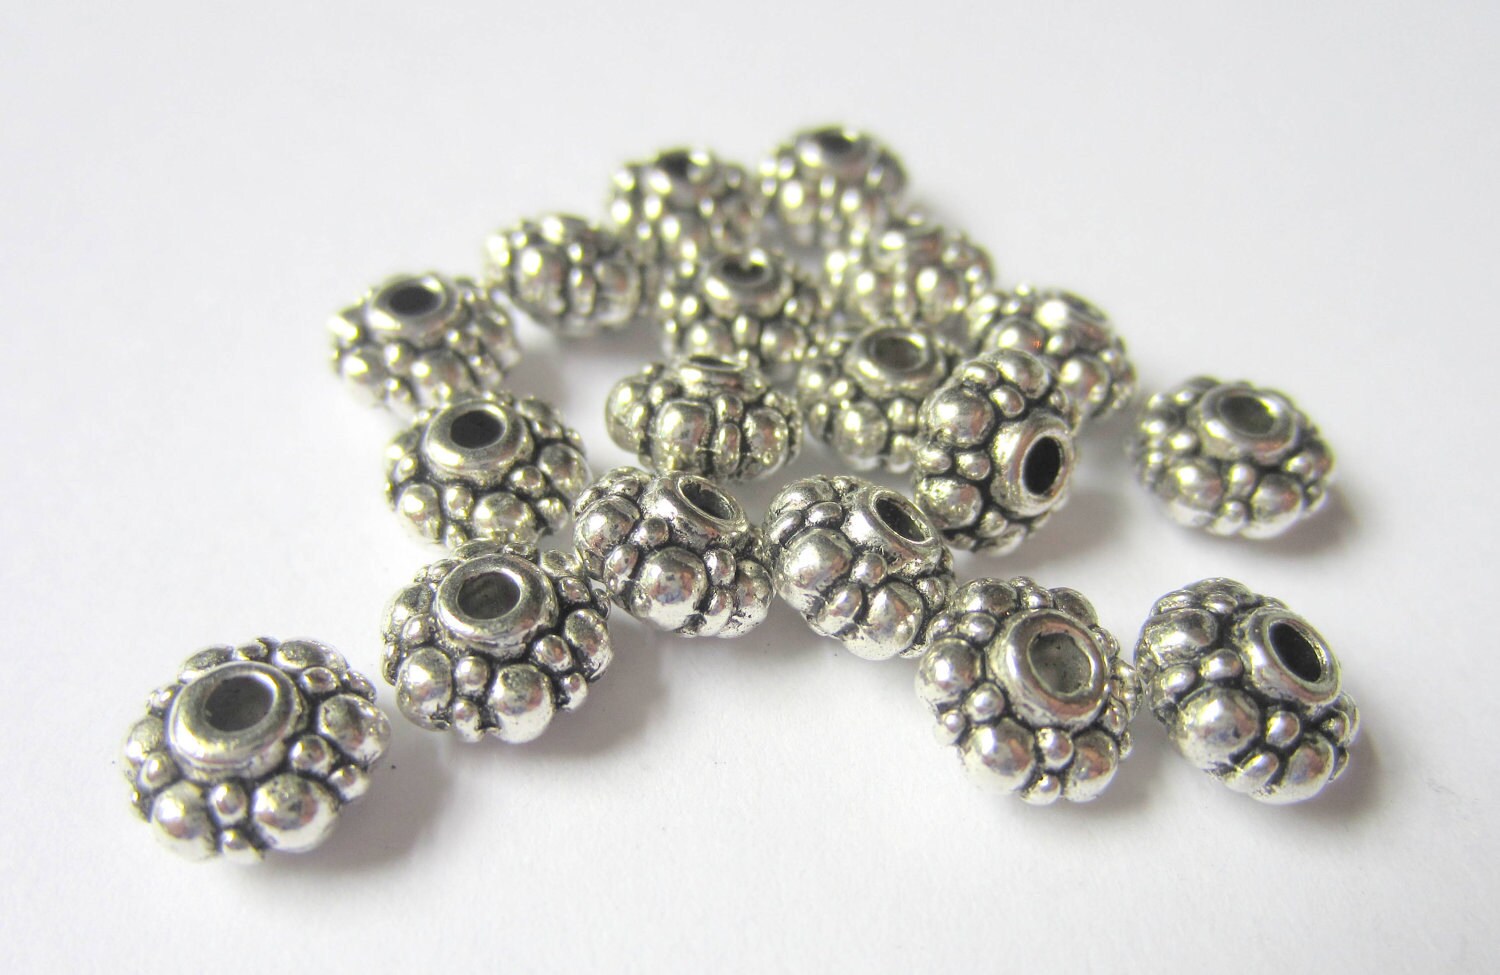 36 Spacer Beads 8mm Antique Silver Tibetan Style - Etsy